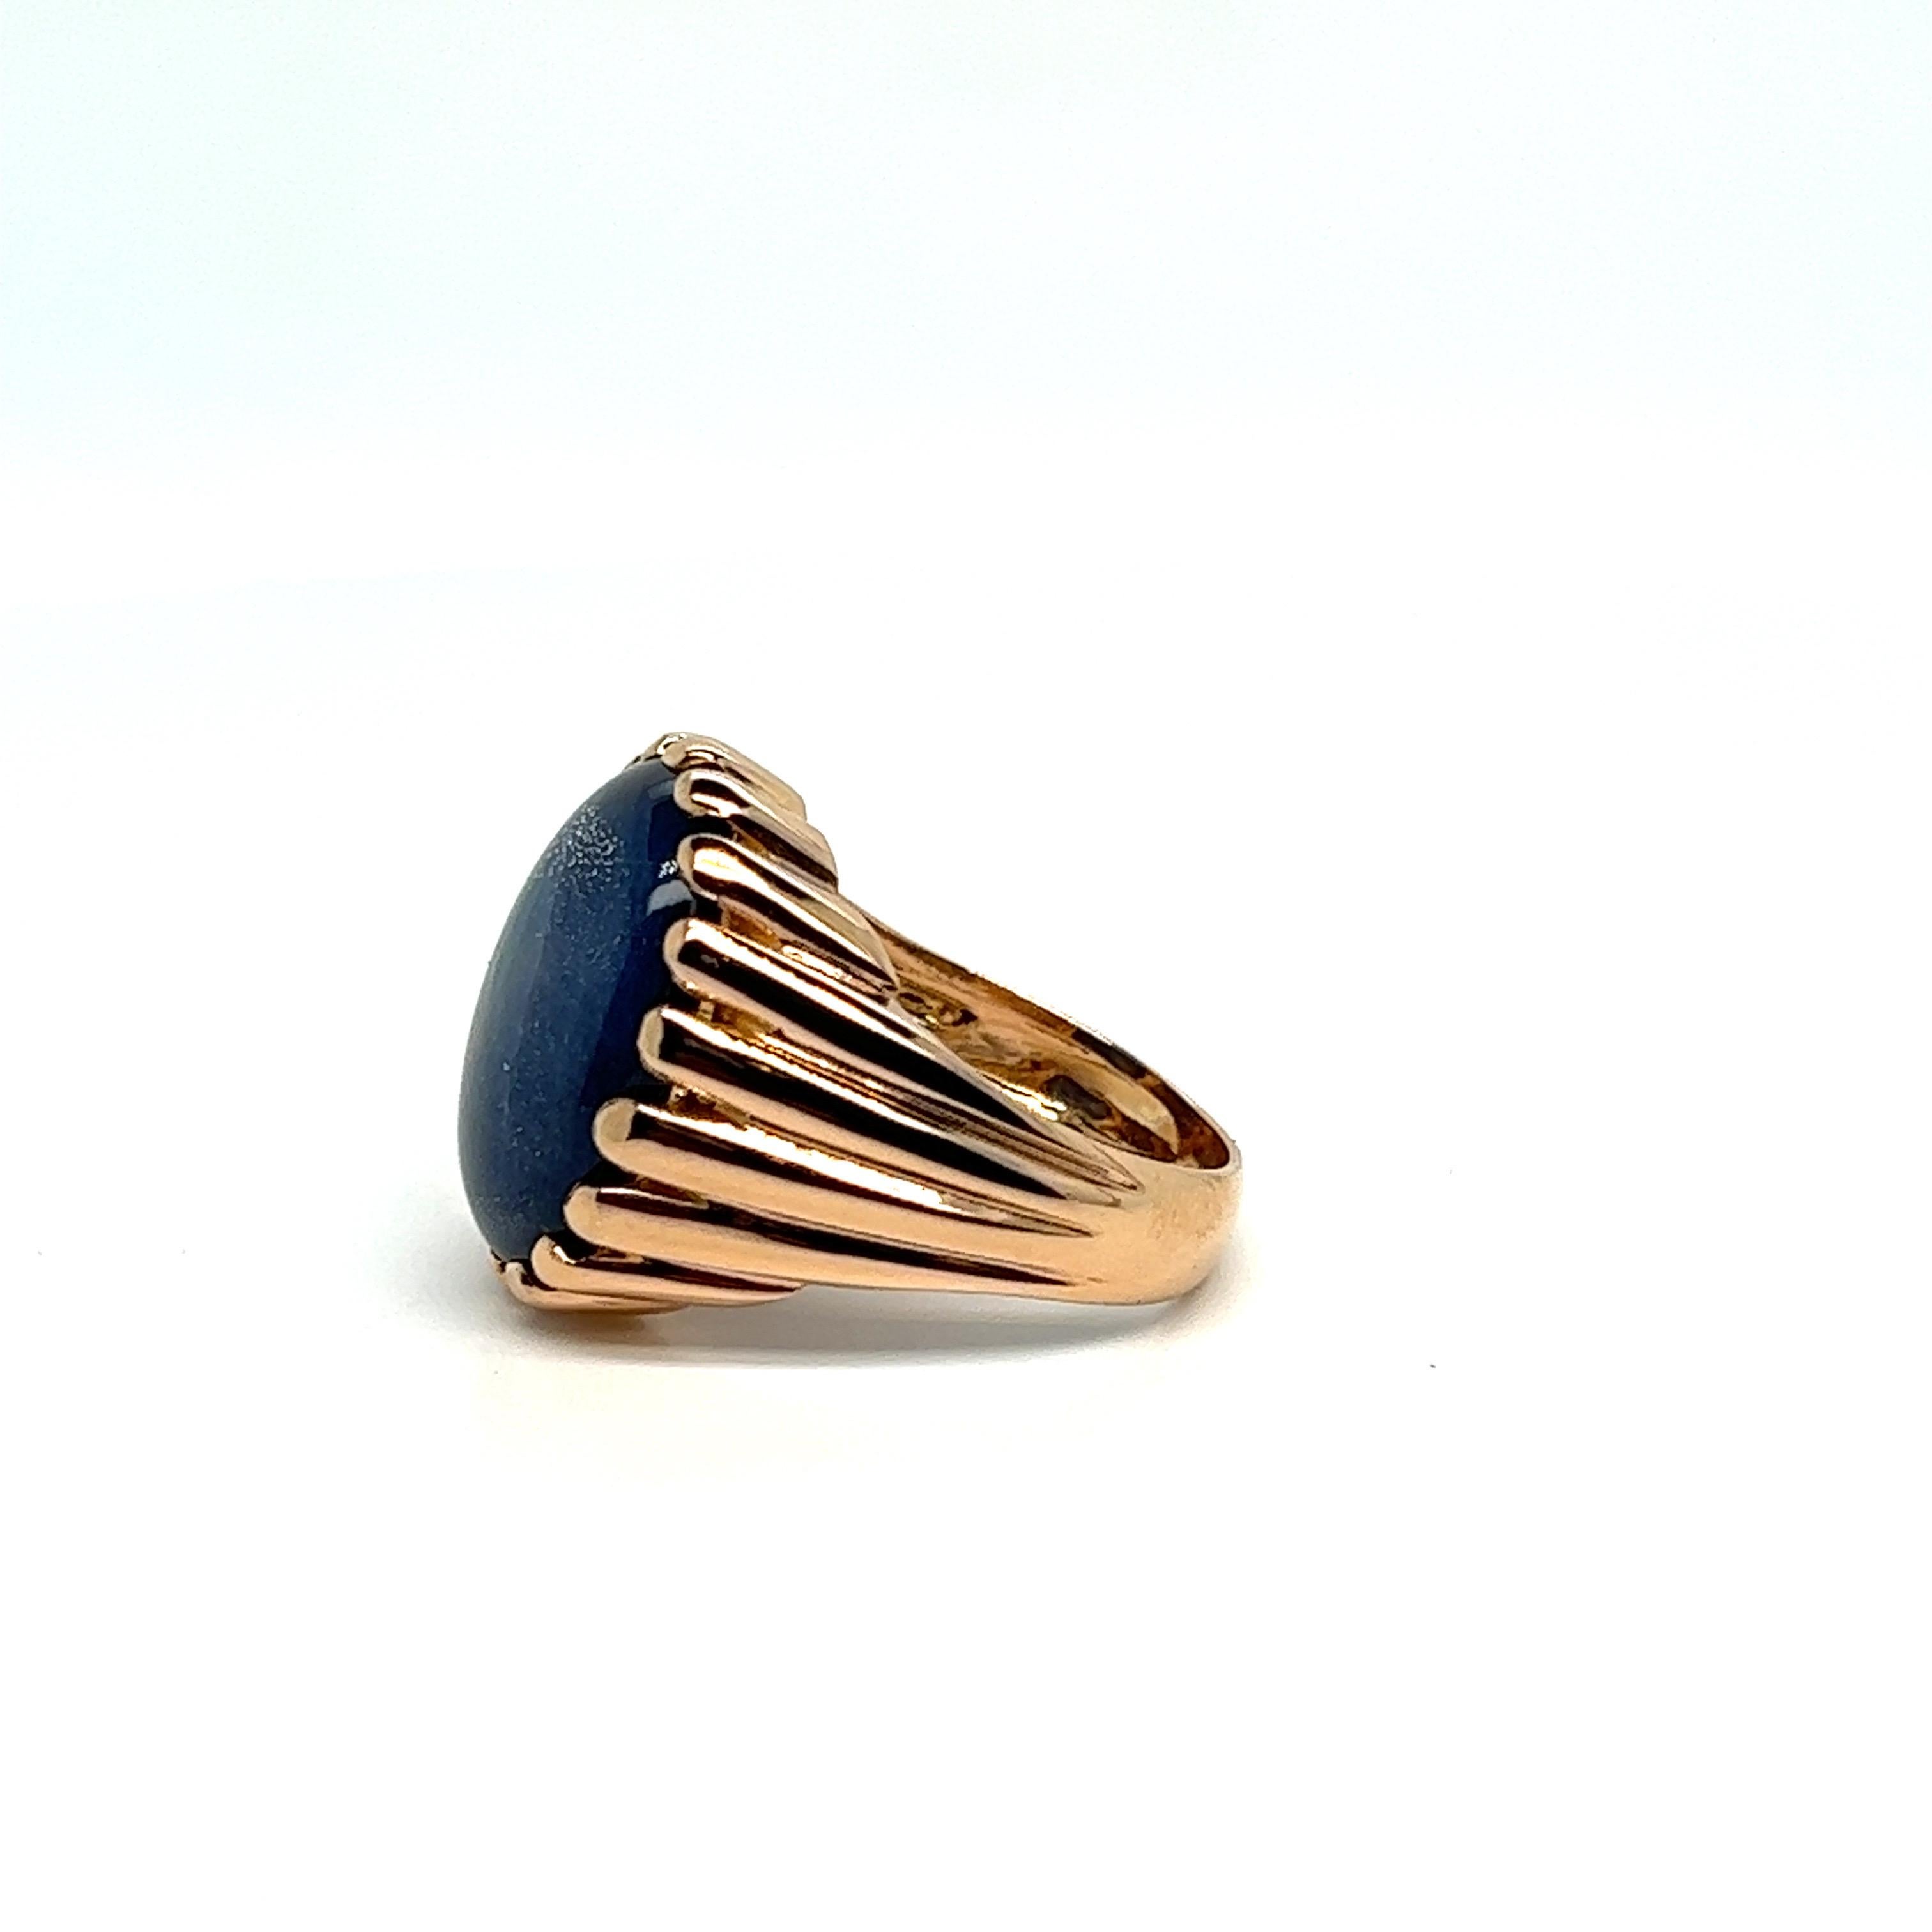 Art Deco Modern French Chevalière Ring with a Blue Corundum Cabochon